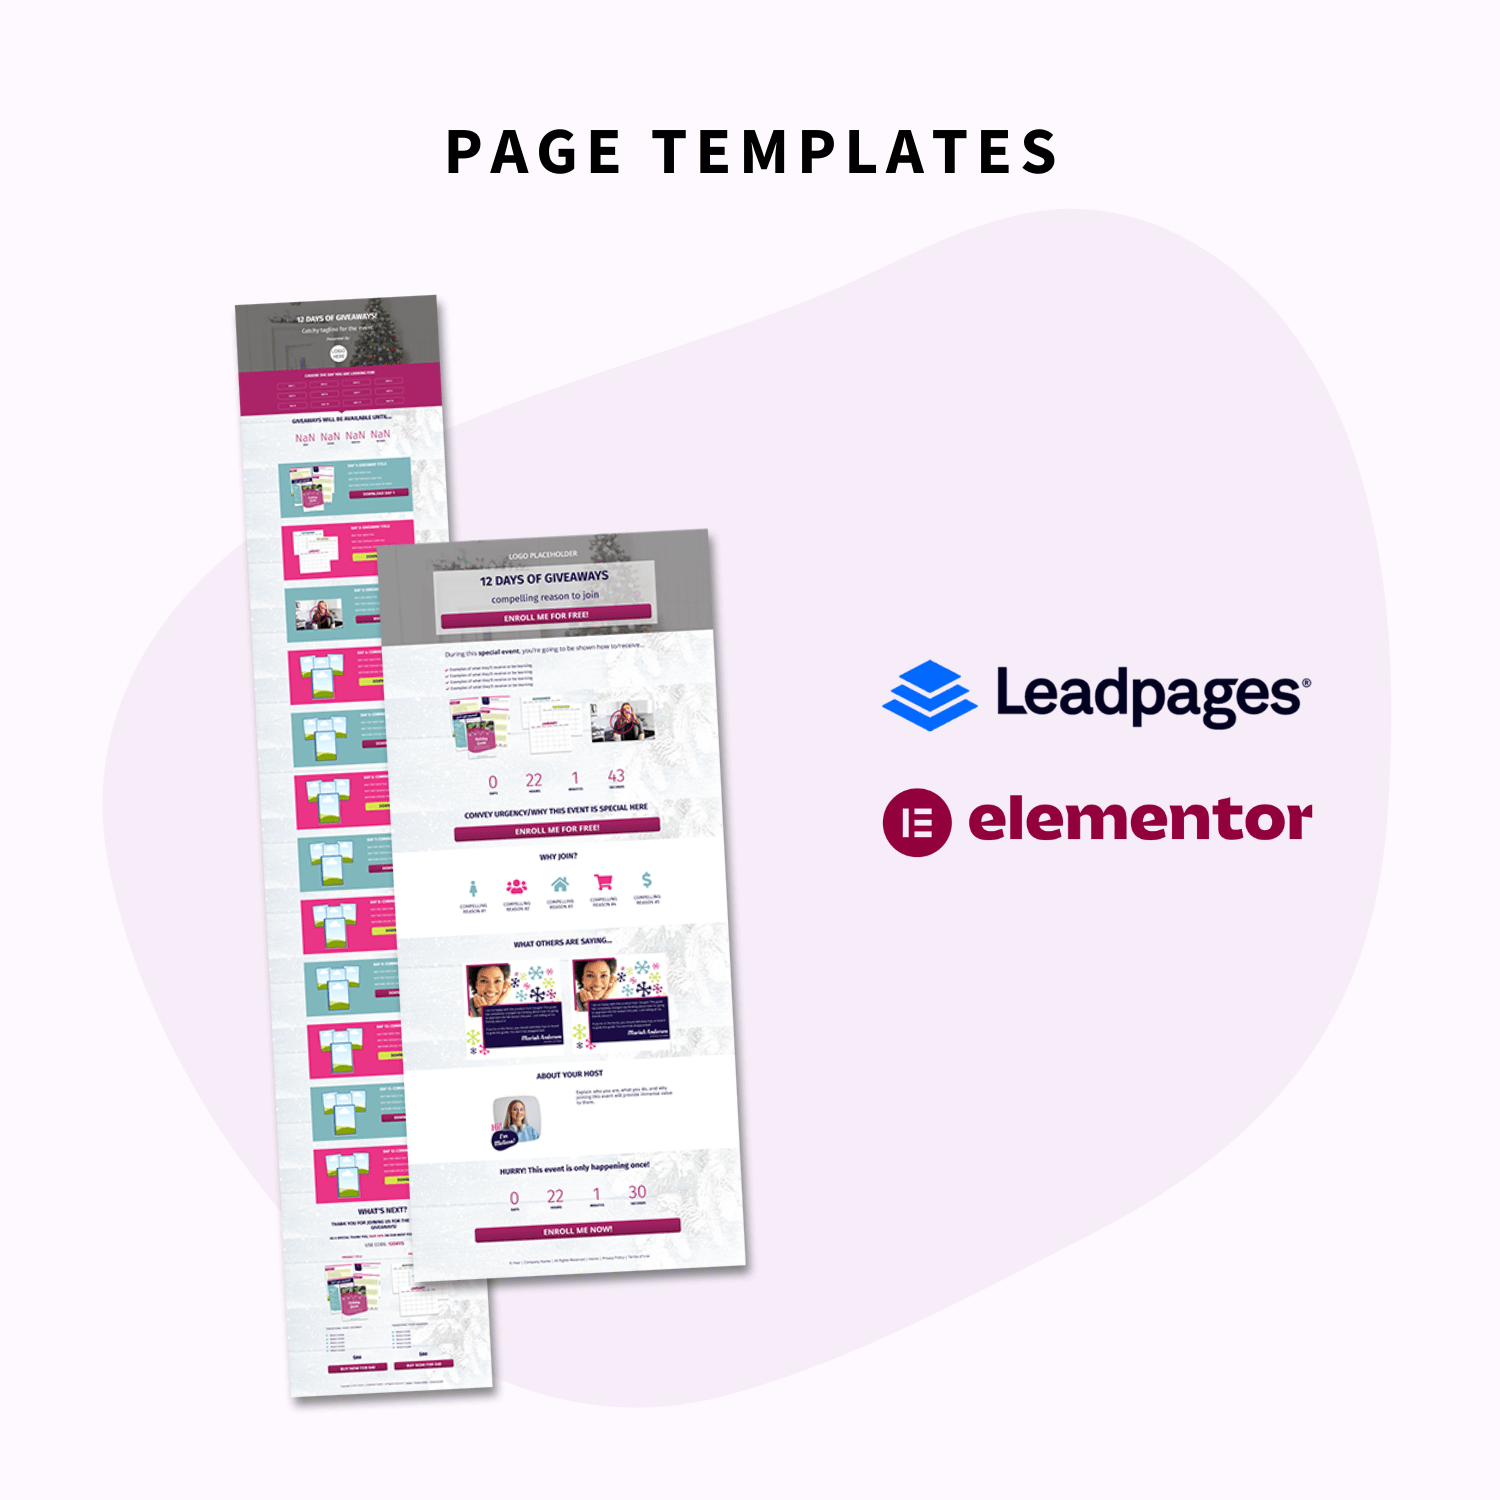 12 Days of Giveaways toolbox page templates for leadpages or elementor